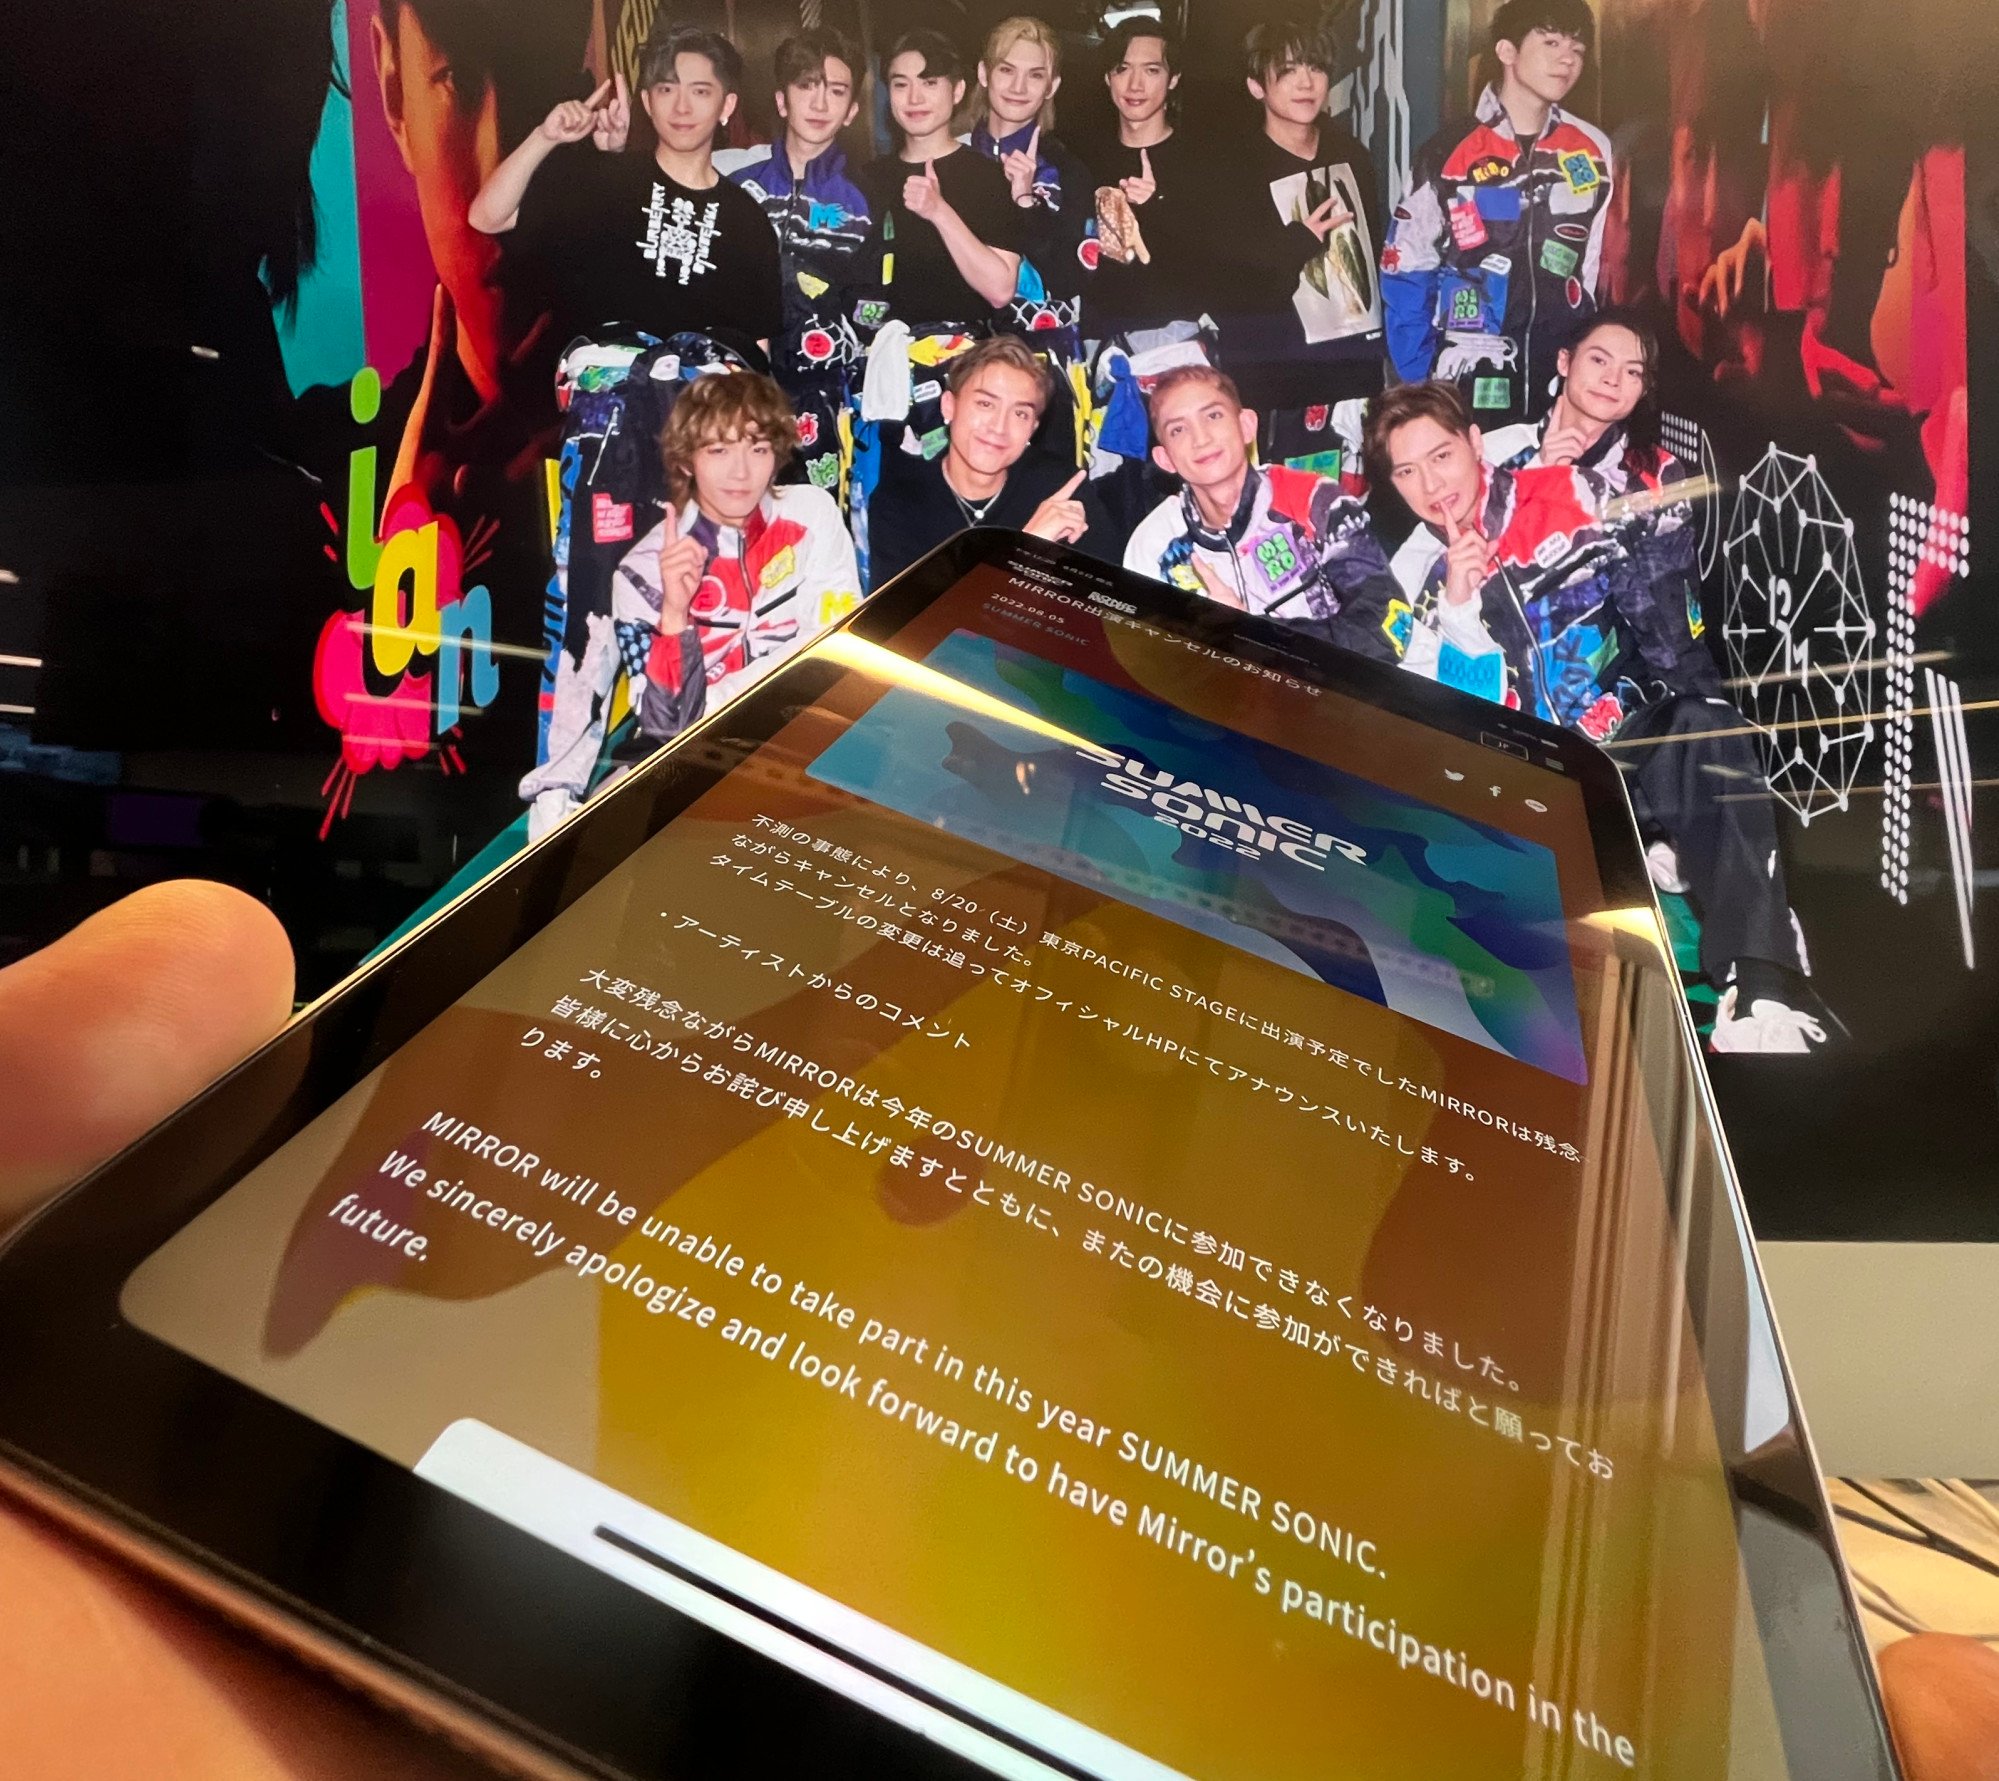 An online message on social media from Summer Sonic organisers, announcing the Mirror pull-out. Photo: SCMP